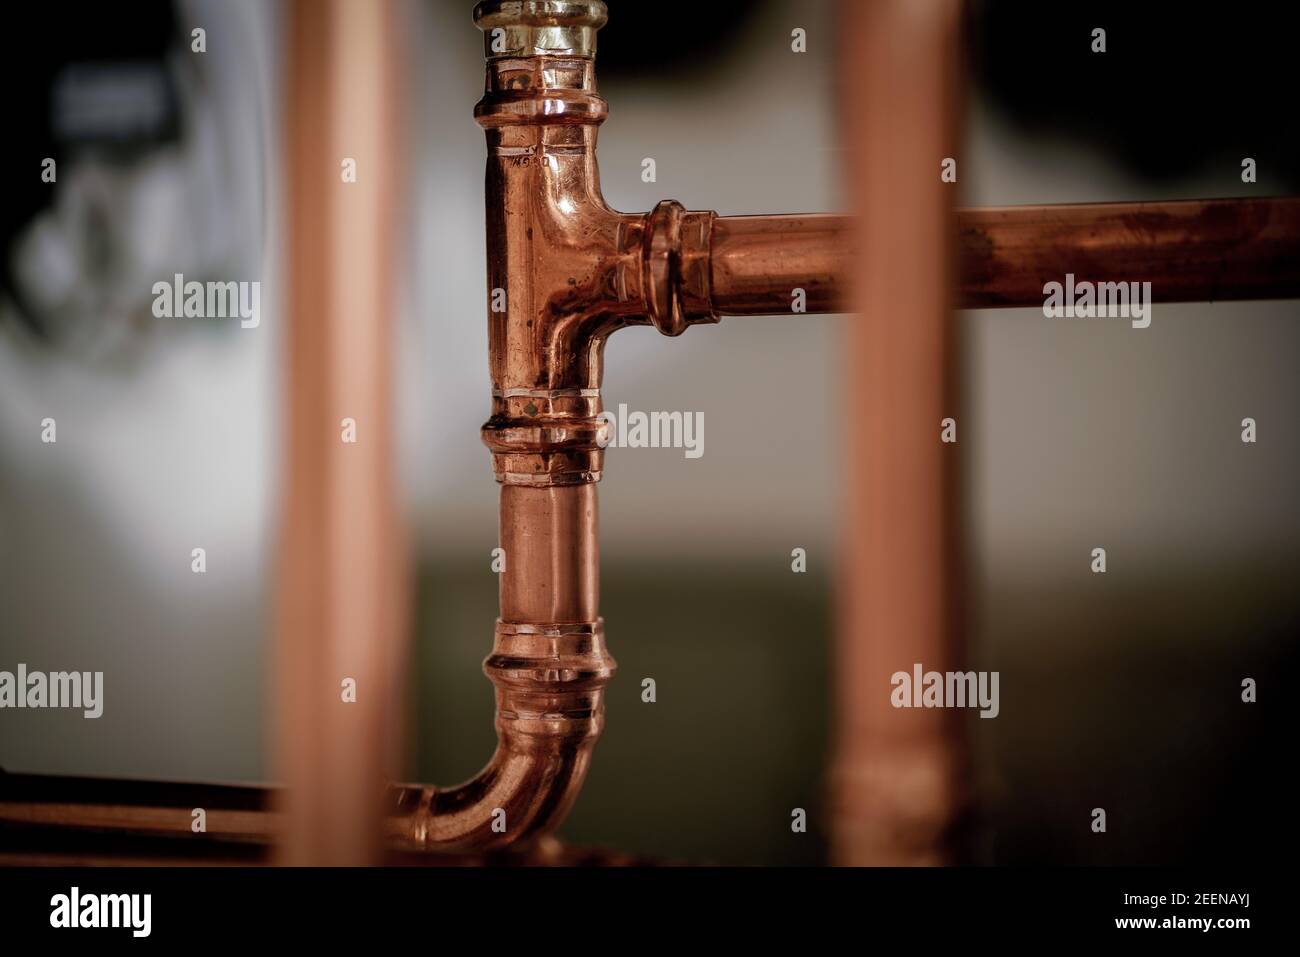 New nd shiny copper water pipes Stock Photo